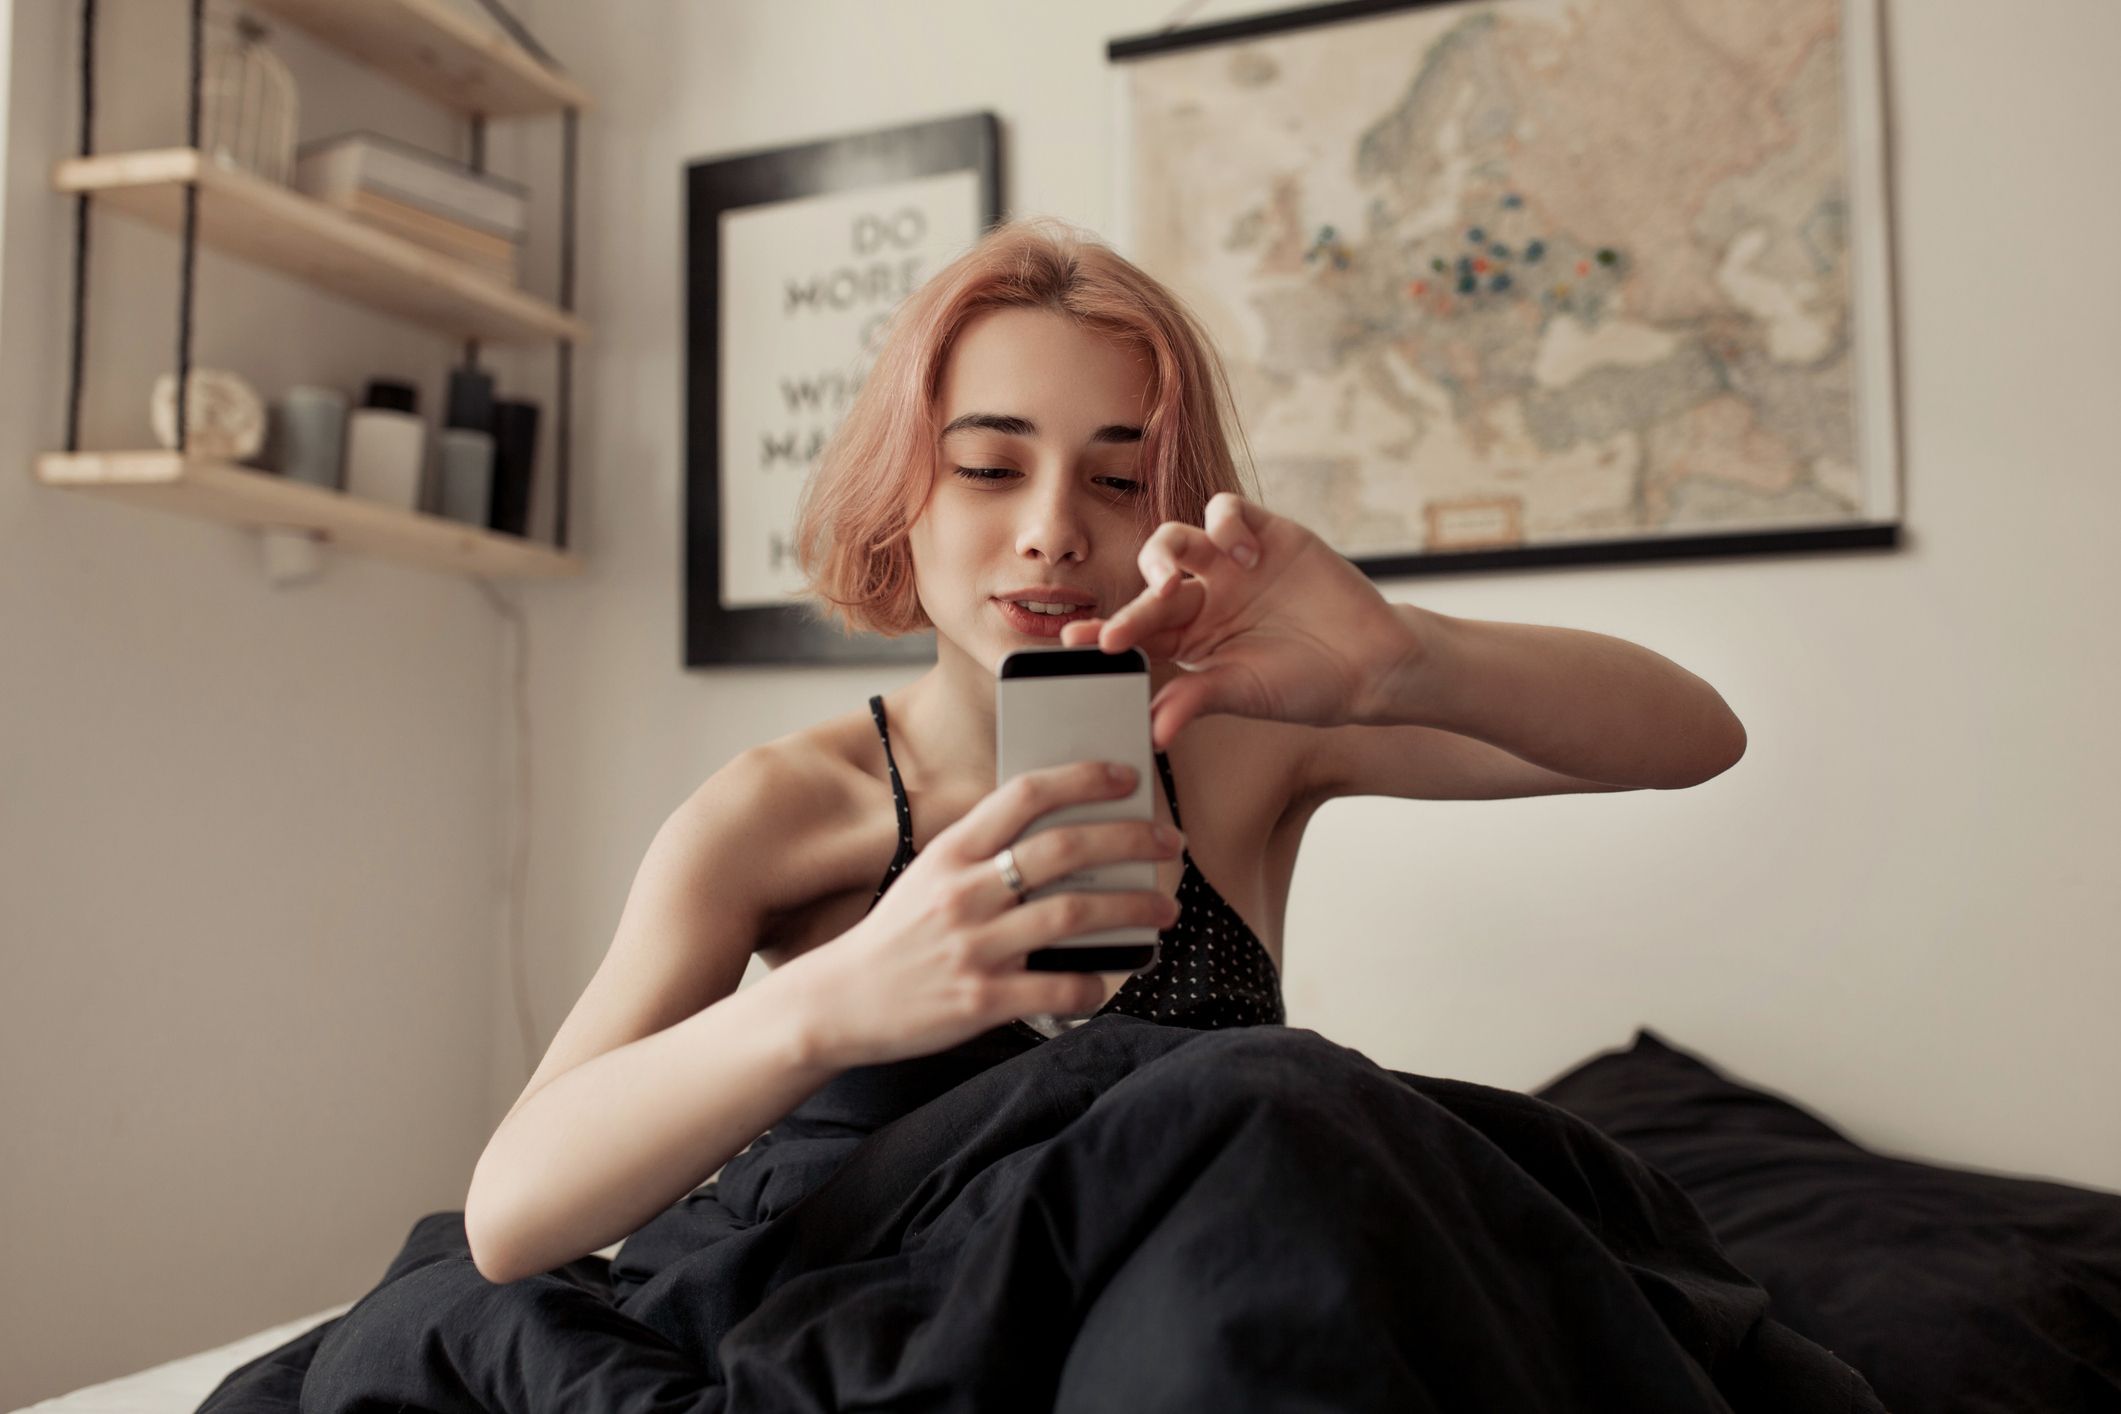 Here's How To Sext On Snapchat Like A Pro